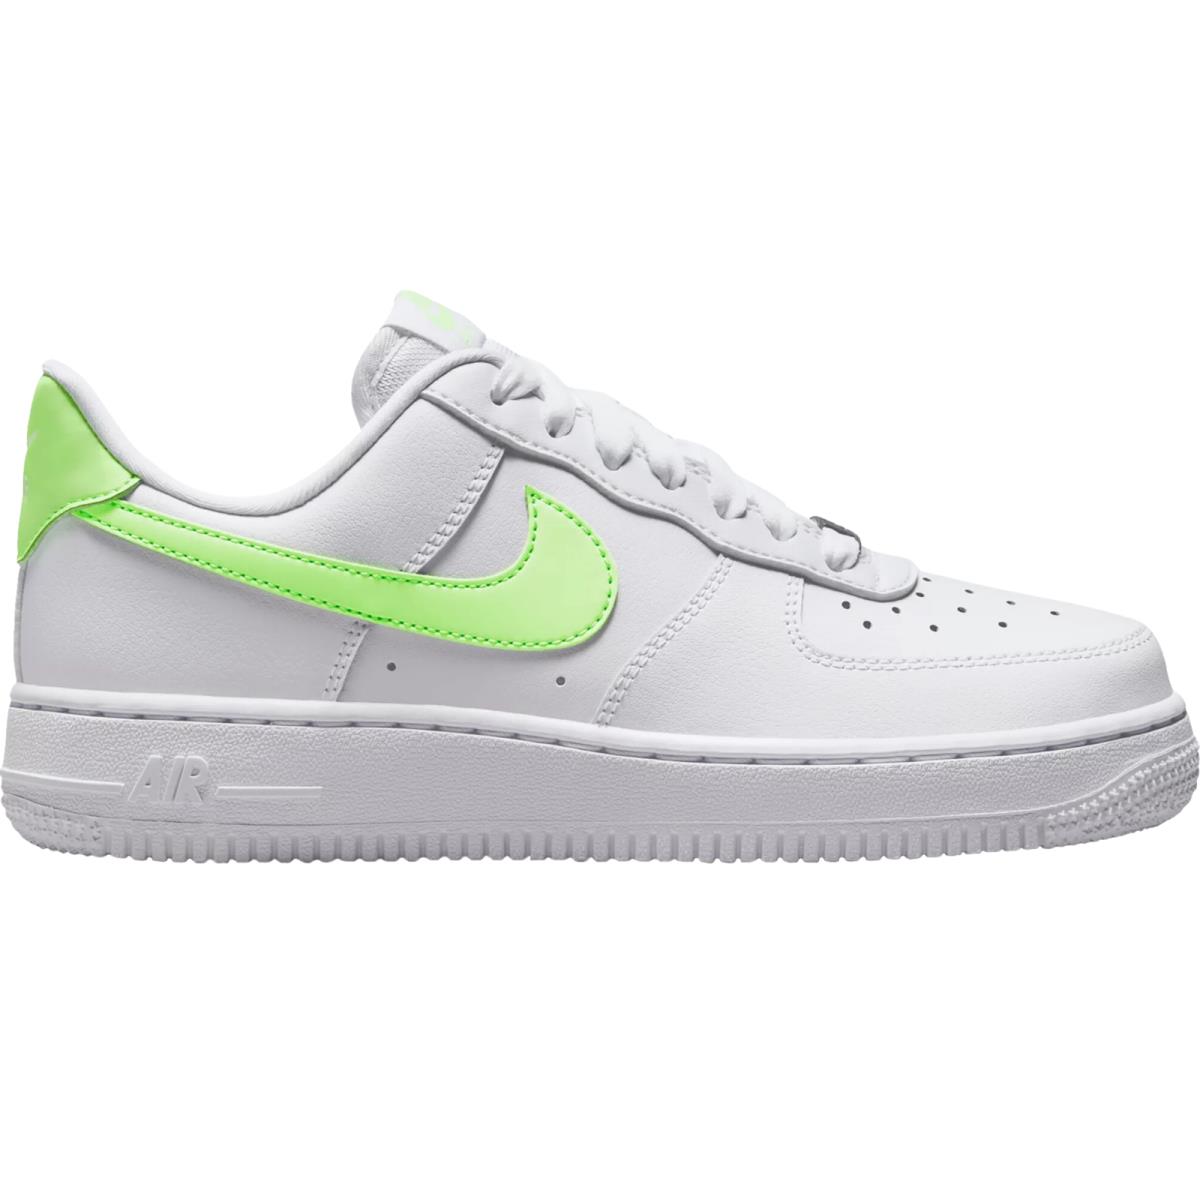 Nike Air Force 1 Women`s Casual Shoes All Colors US Sizes 6-11 White/Lime Blast